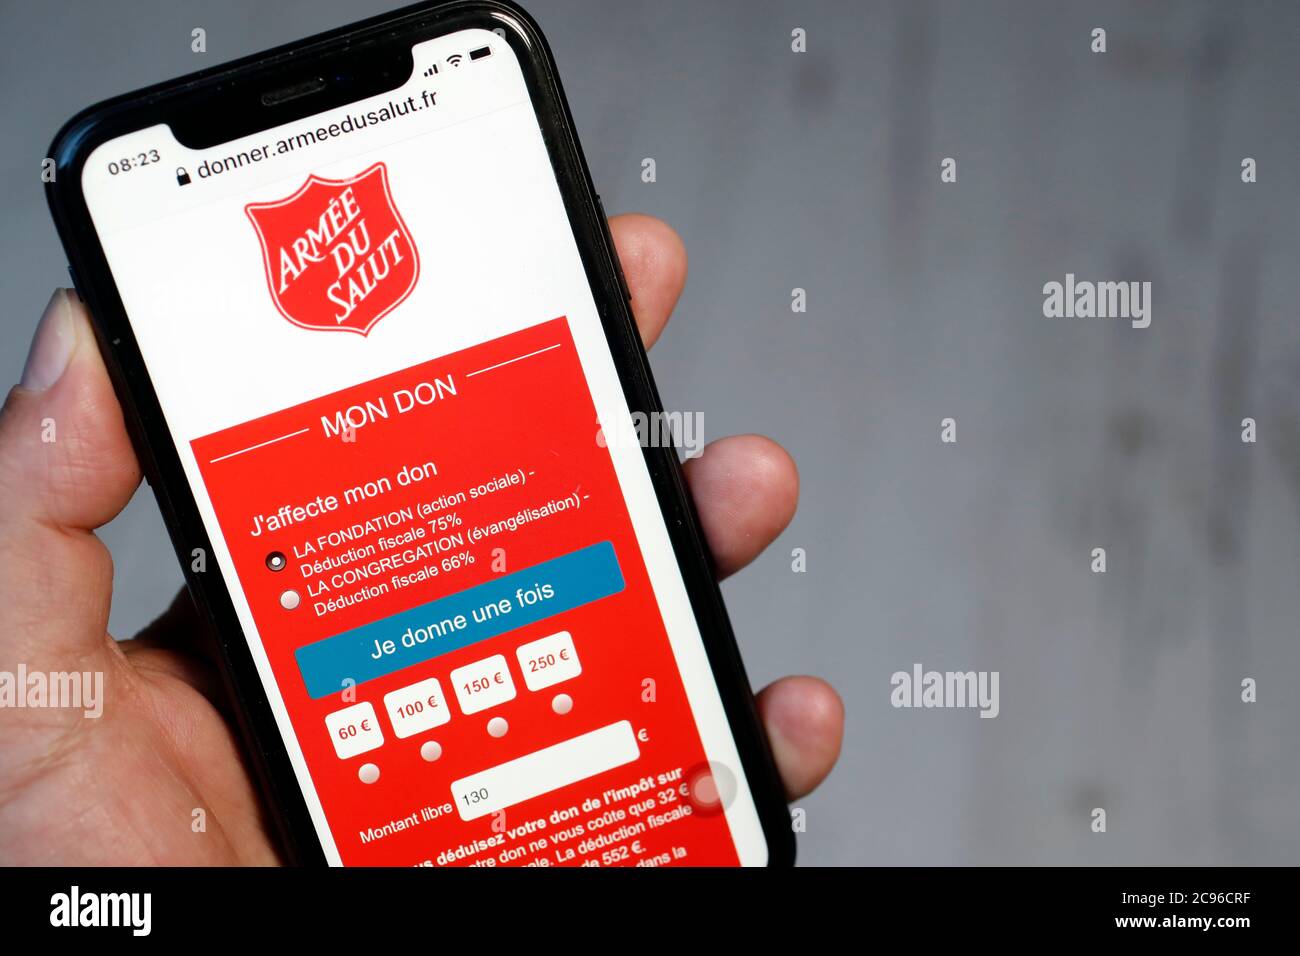 Online funding on  smartphone to support Salvation Army.  France. Stock Photo